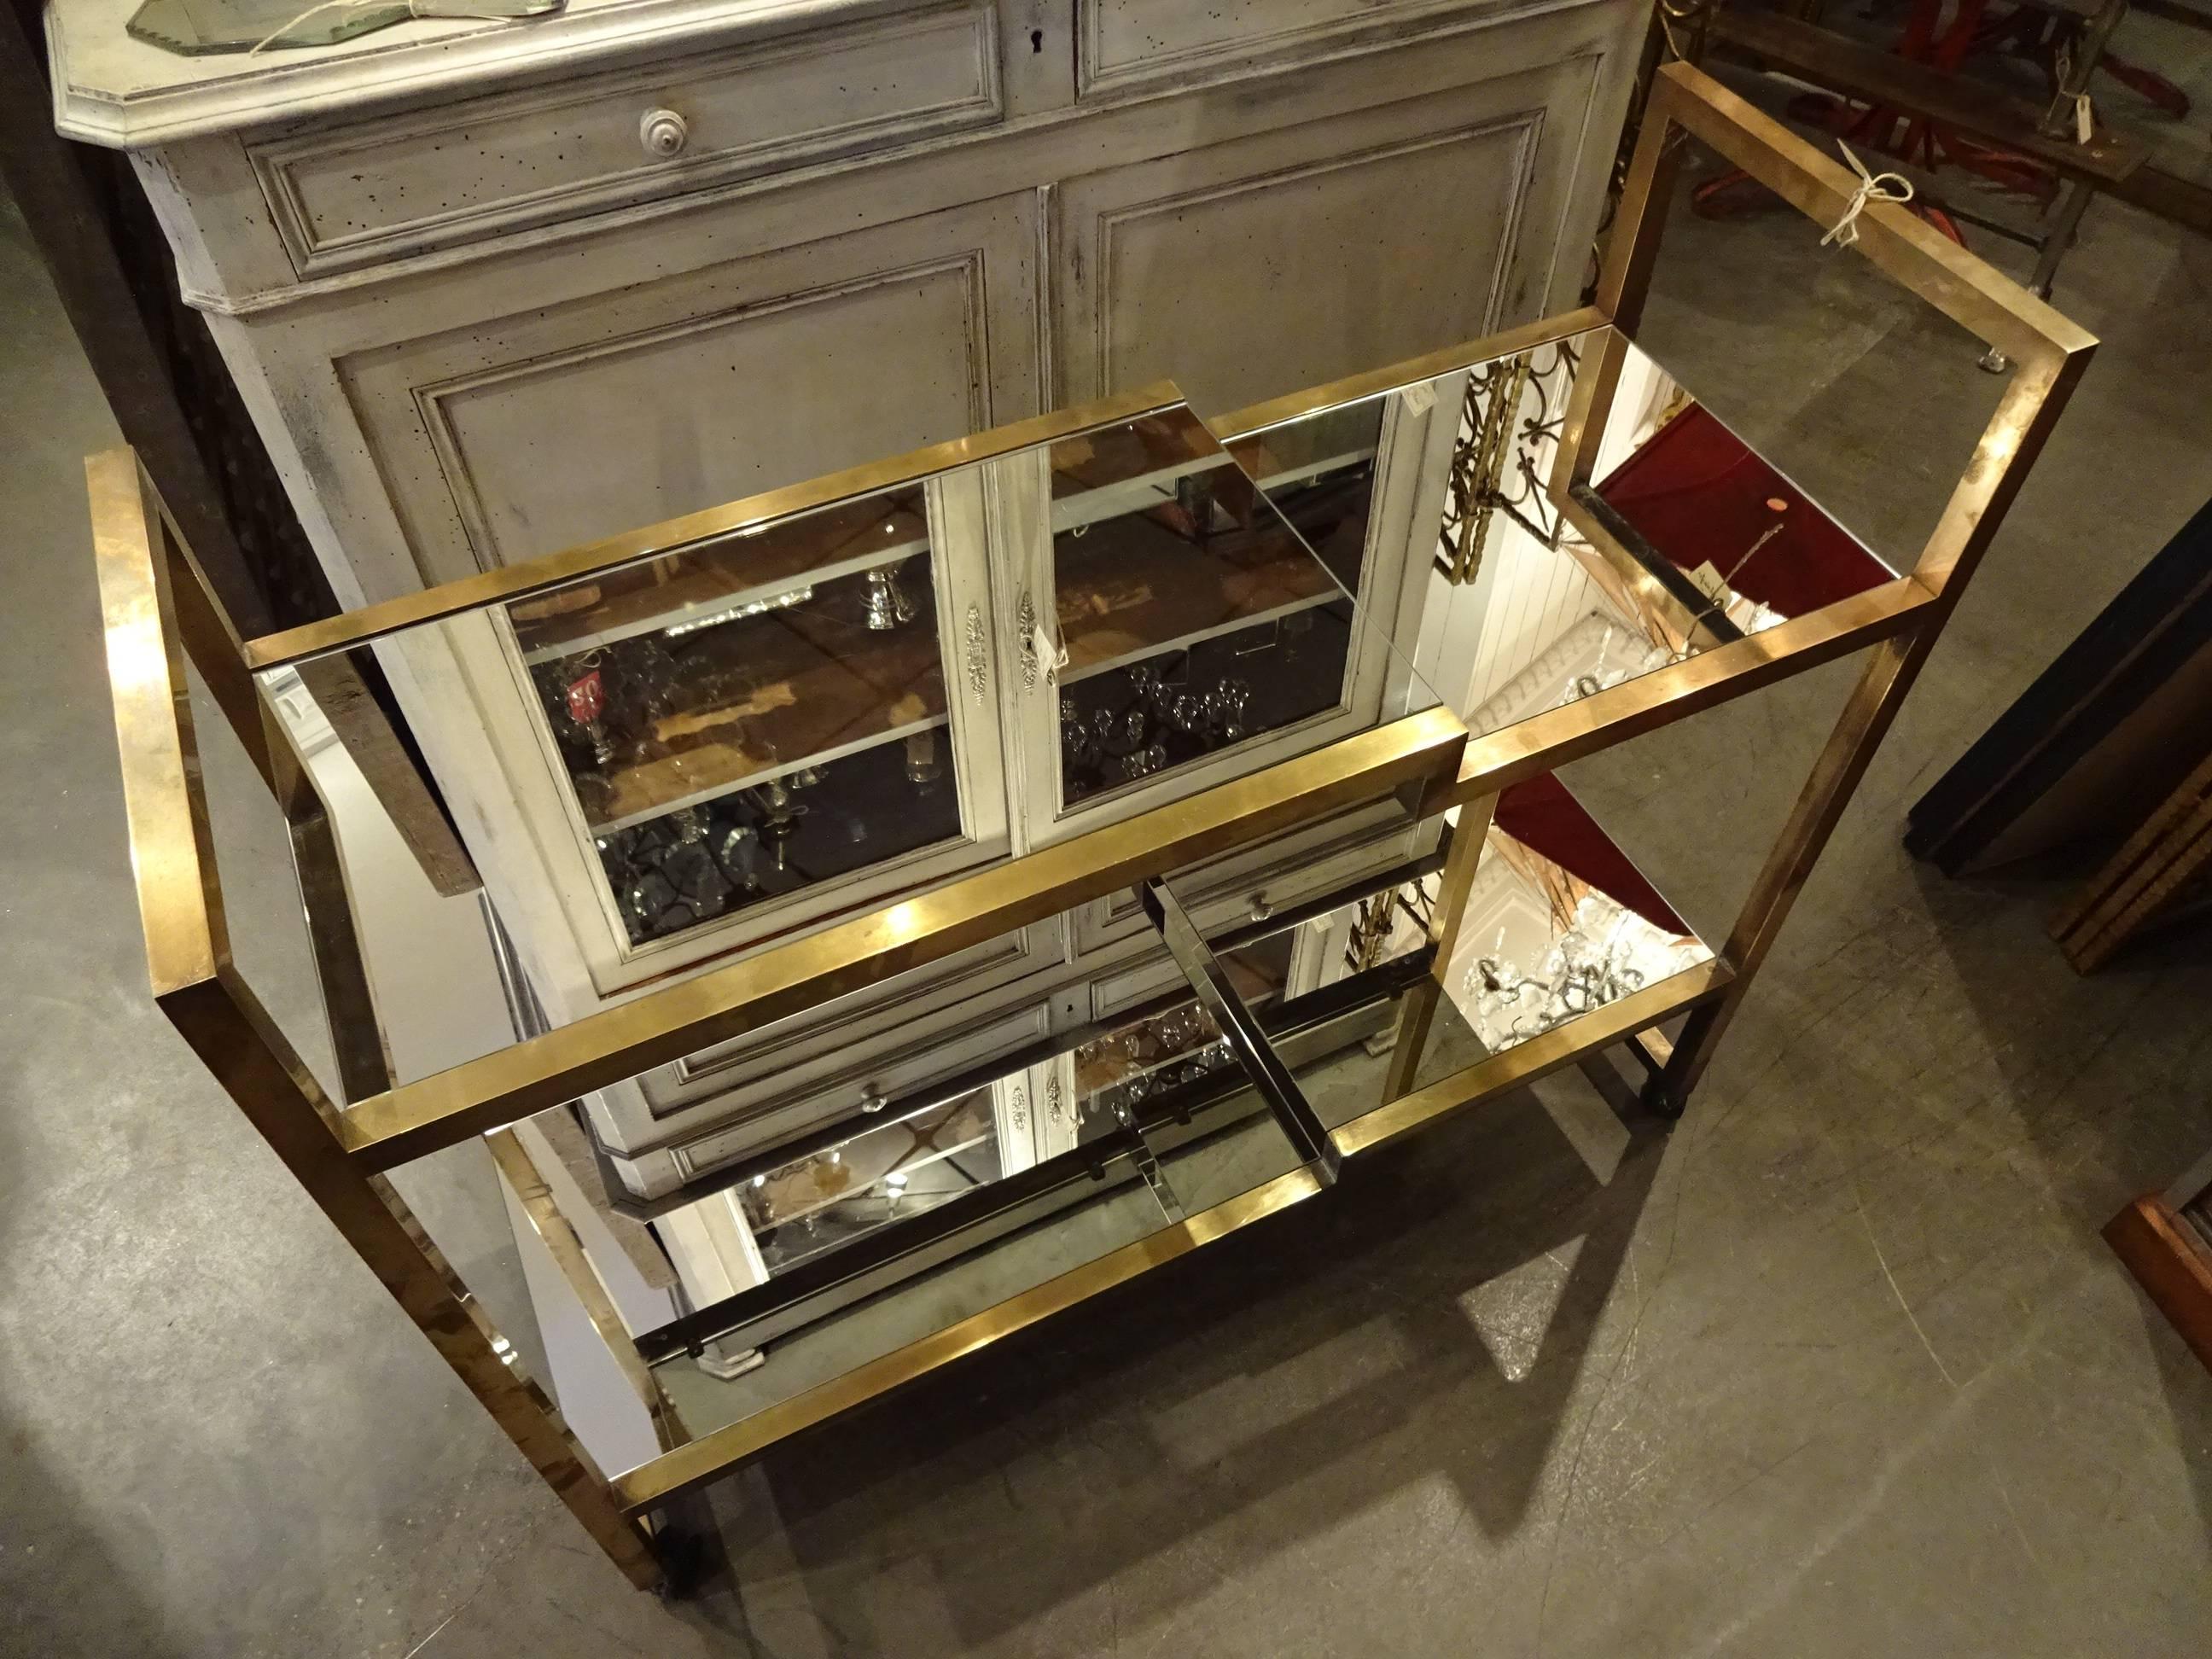 Fantastic vintage French Mid-Century, 1950s brass shelving unit on wheels with mirrored glass shelves. Absolutely gorgeous piece. Lots of practical uses, but also would make a great room divider.